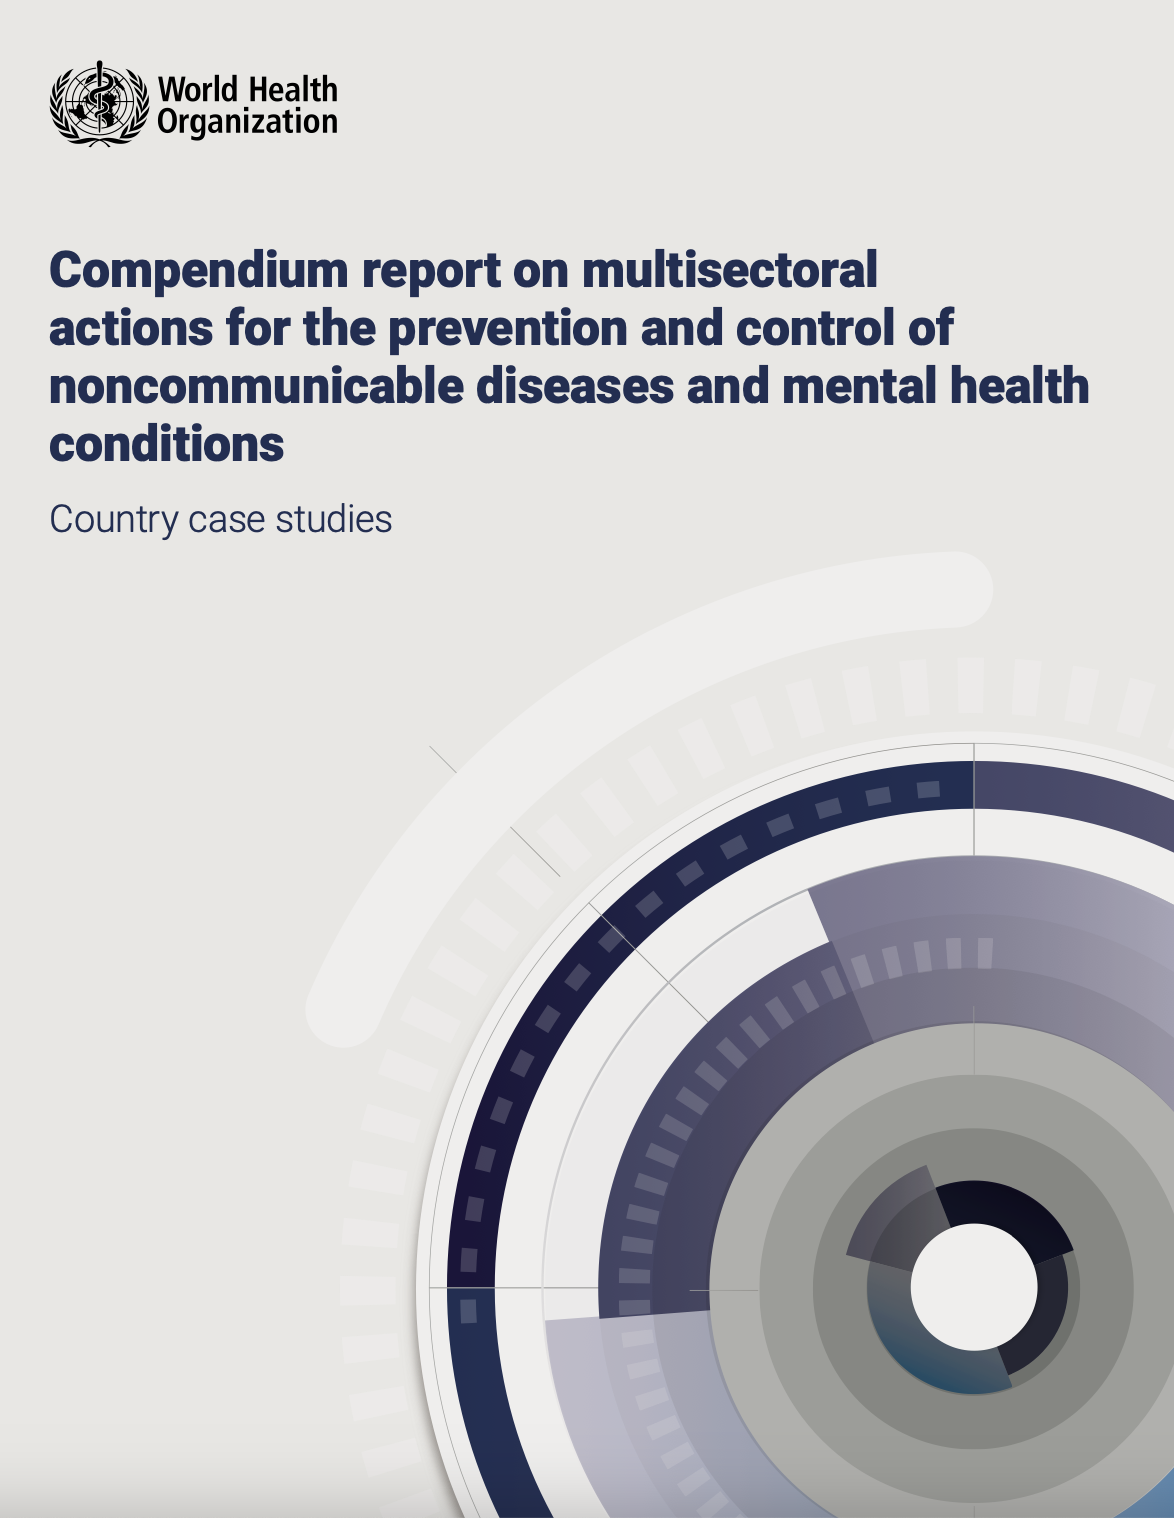 Compendium report on multisectoral actions for the prevention and control of noncommunicable diseases and mental health conditions: country case studies